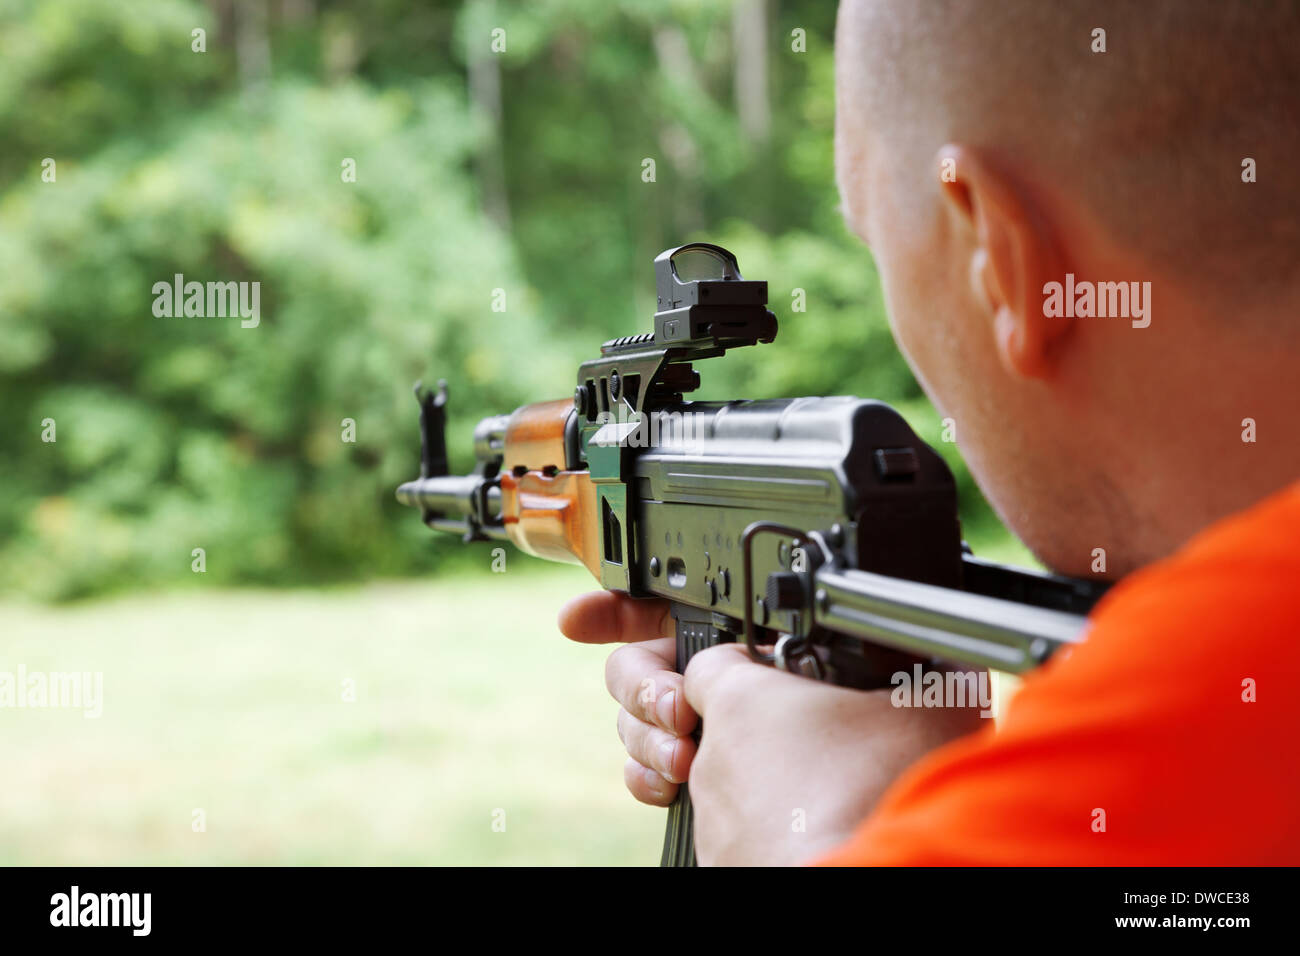 Man shooting an automatic rifle for strikeball. Focus on the rifle sights. Stock Photo